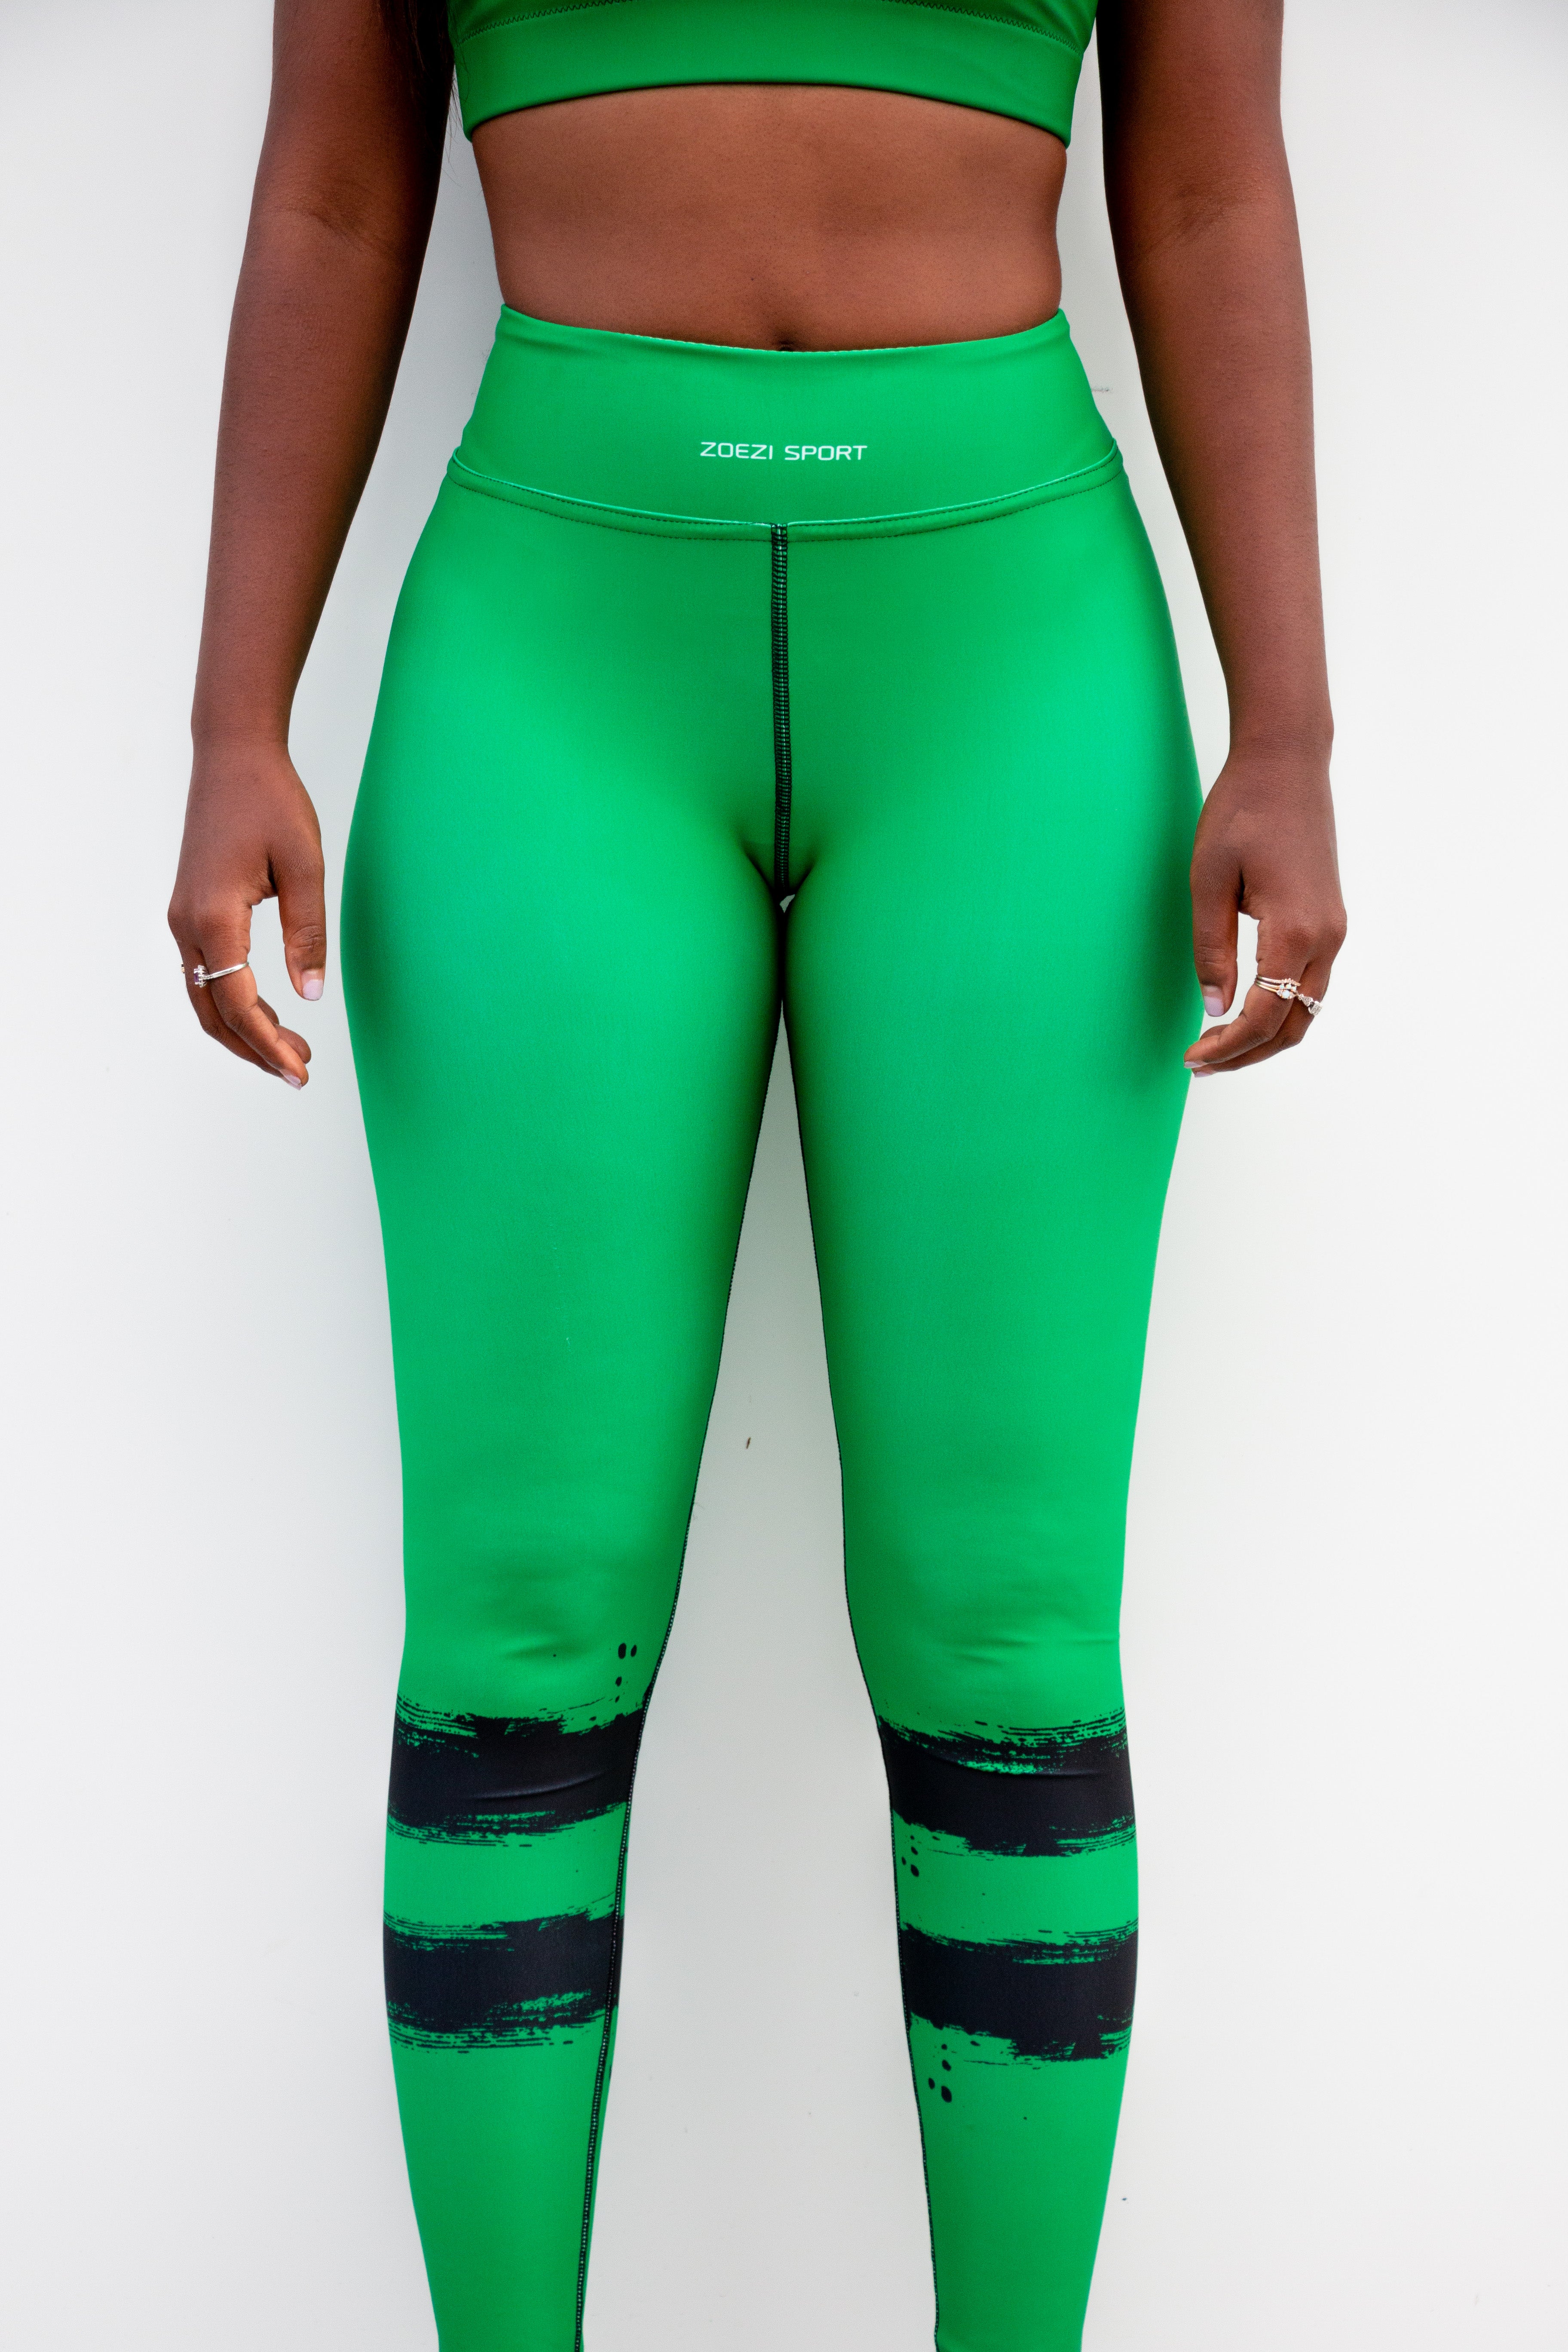 SALE! Emerald Green Cassi Workout Yoga Leggings with Mesh